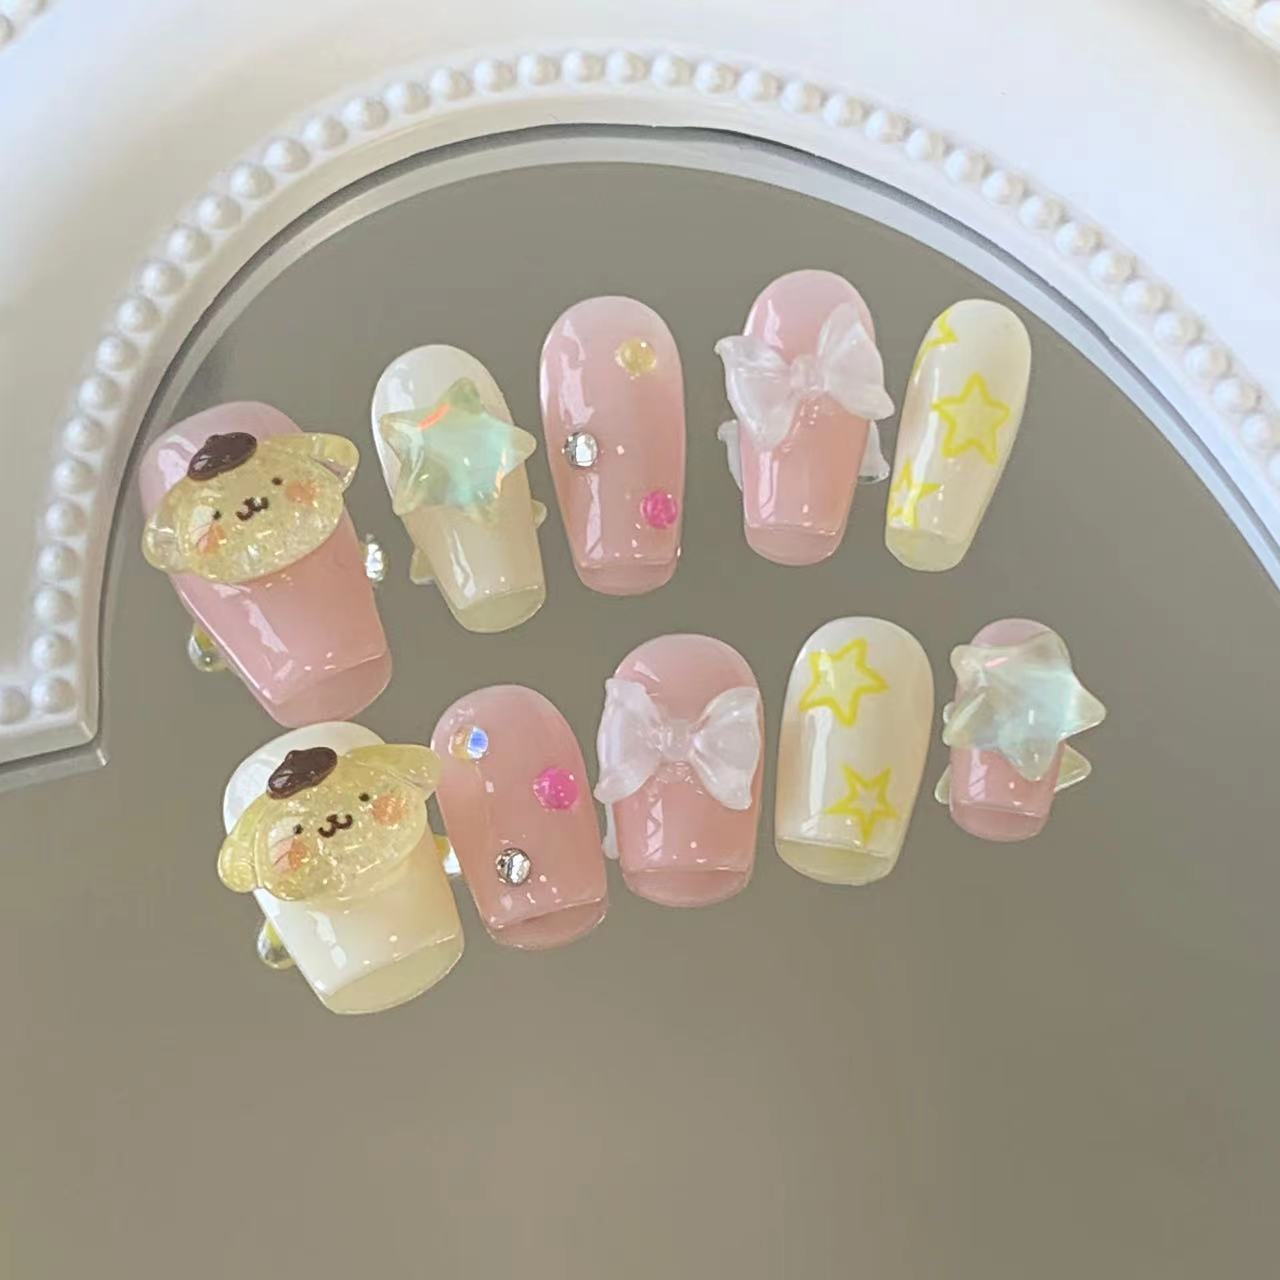 POM POM PURIN -TEN PIECES OF HANDCRAFTED PRESS ON NAIL